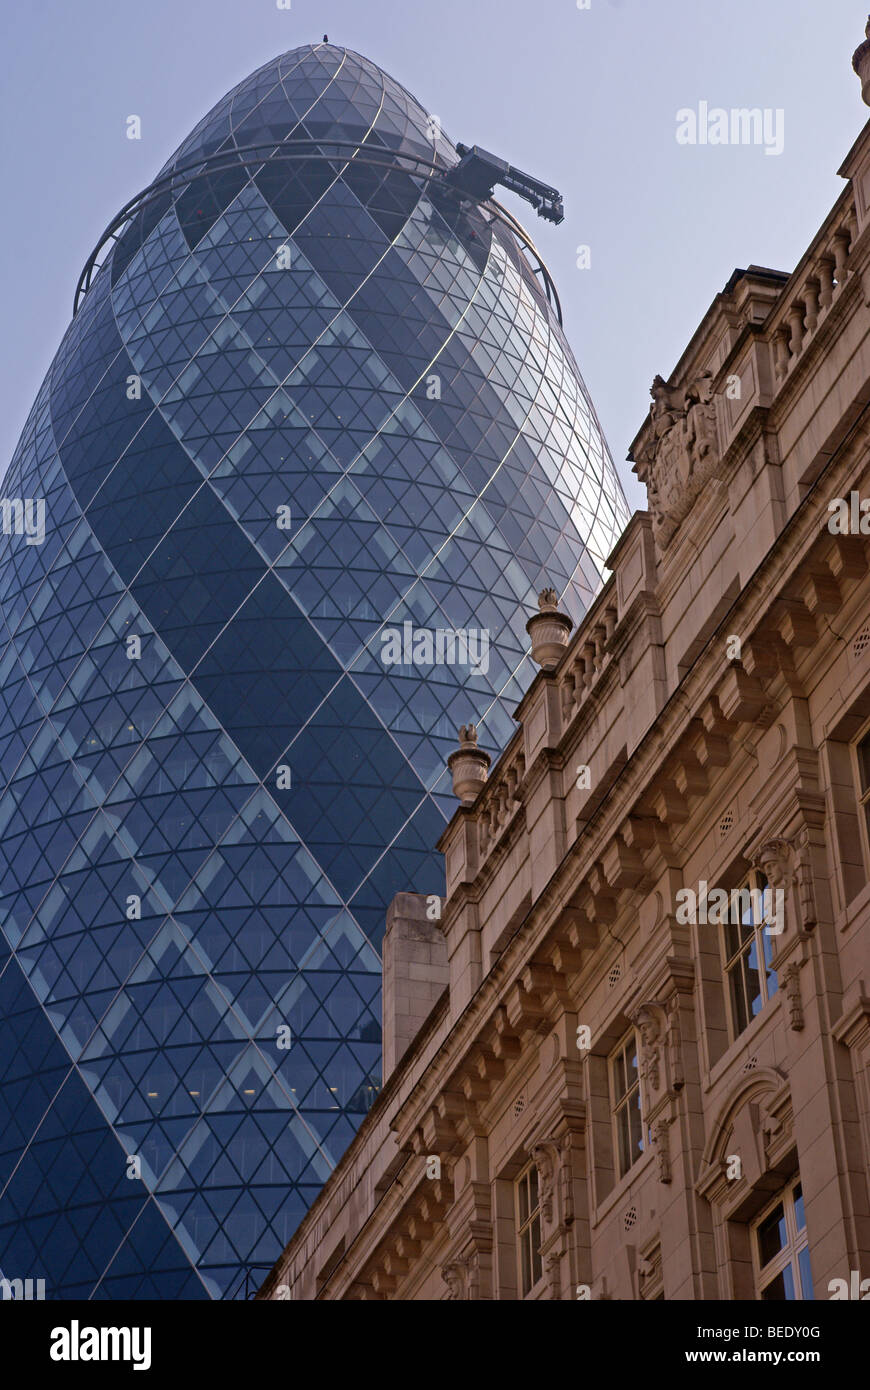 The classical architecture of St Helens Place contrasts with the Swiss Re tower (Gherkin) Stock Photo